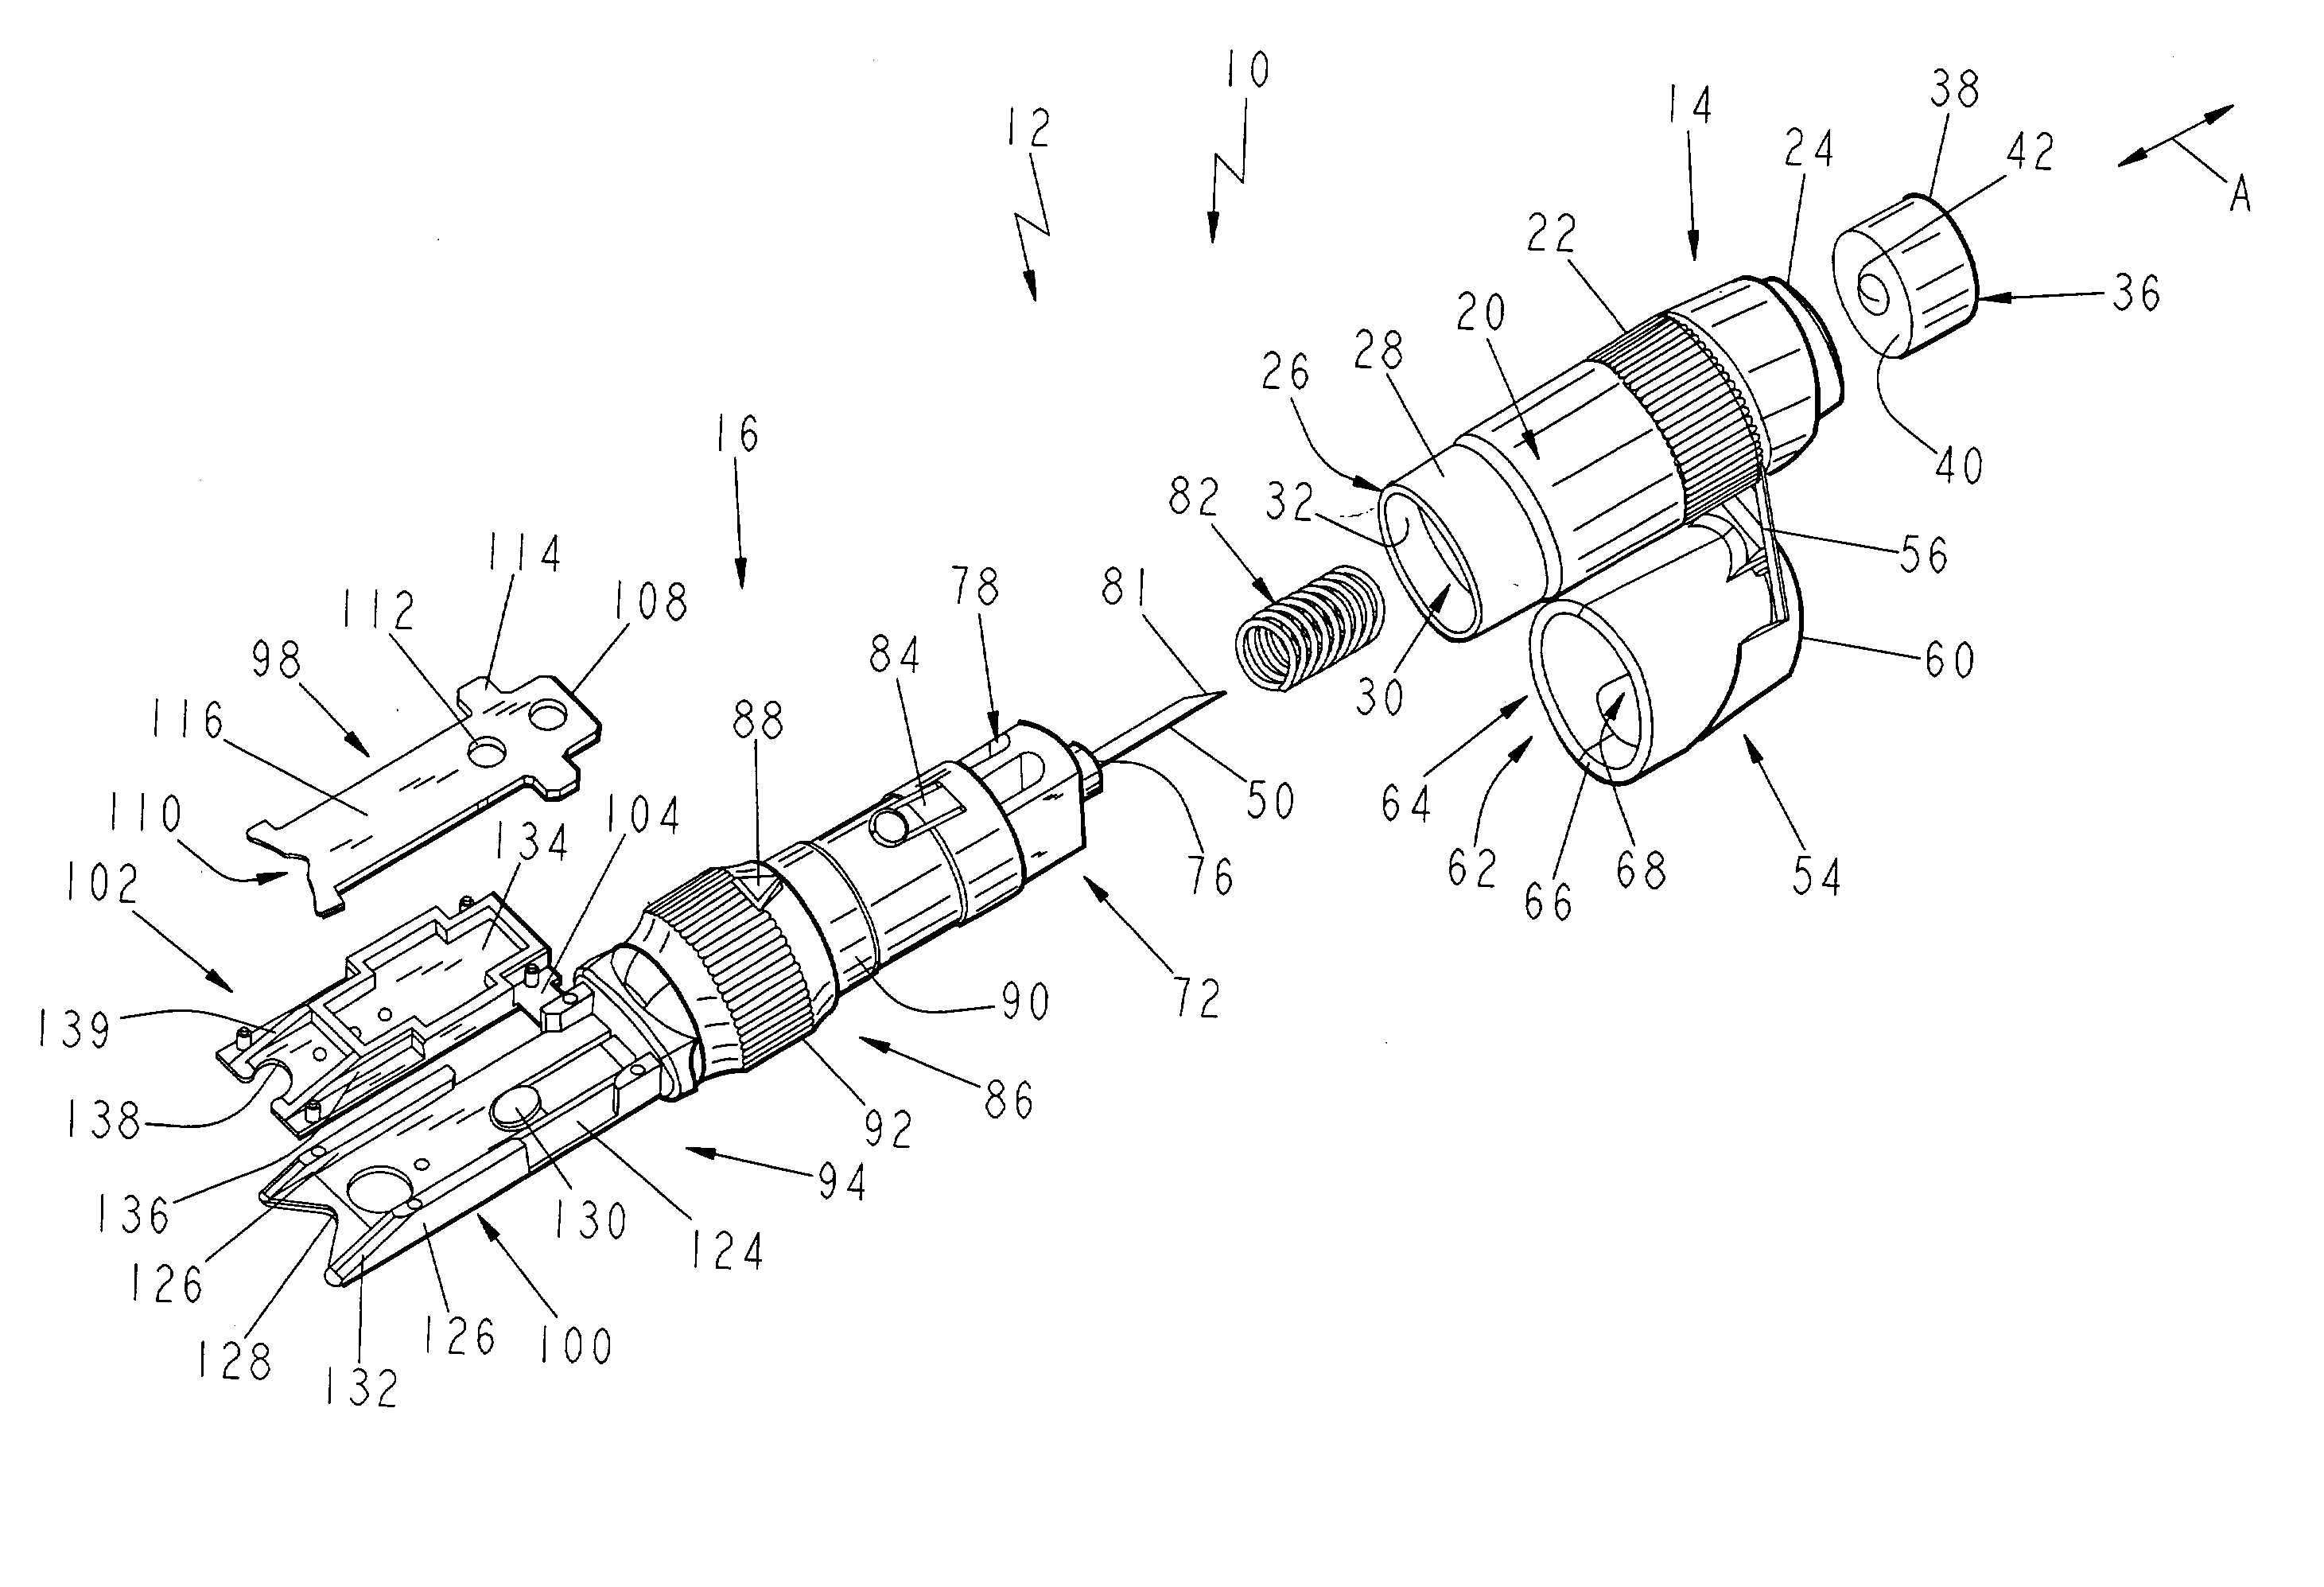 Consolidated body fluid testing device and method